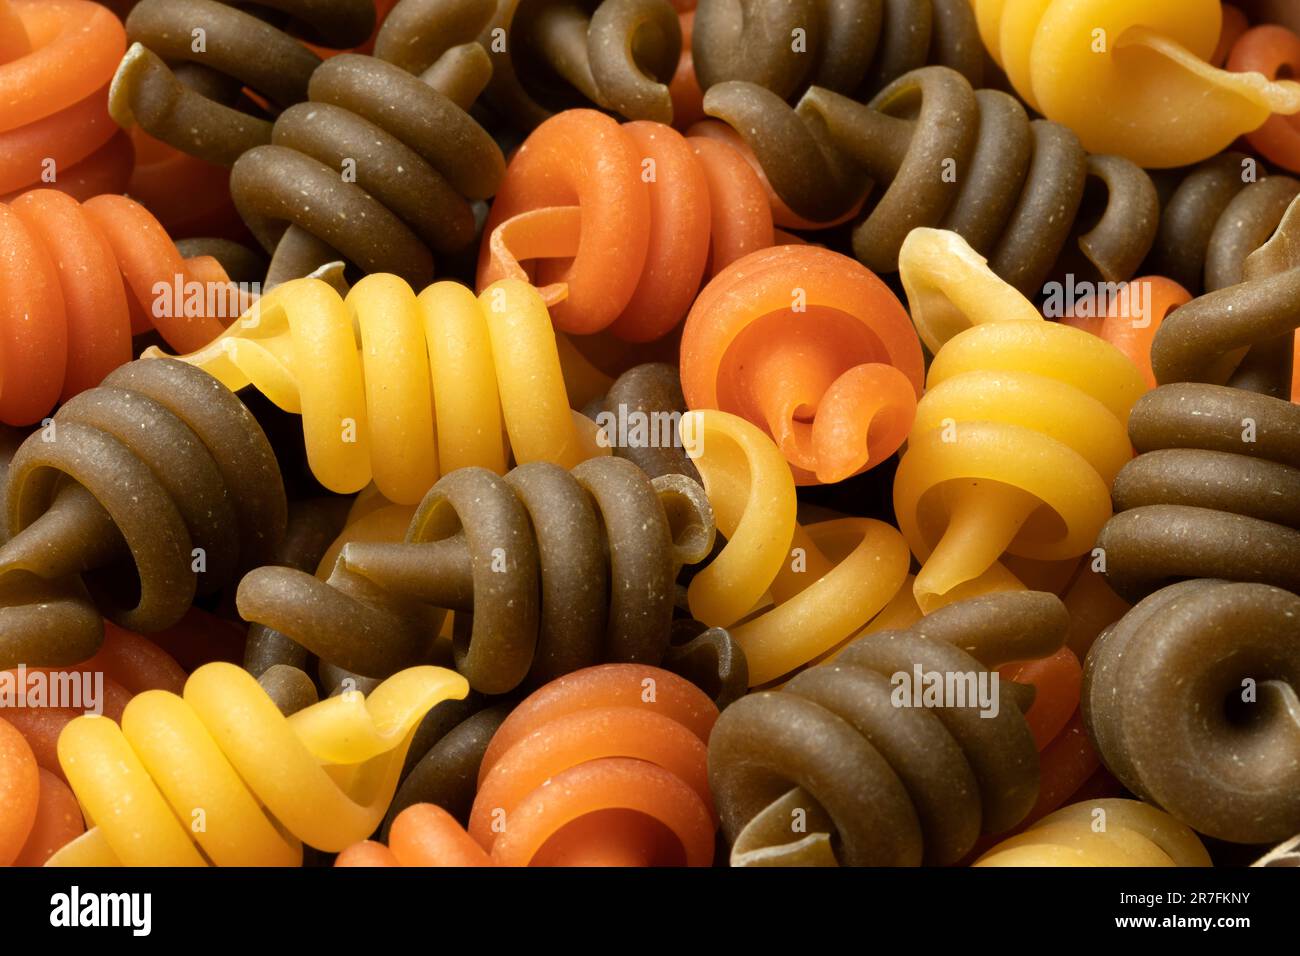 Uncooked Trottole tricolore pasta close up full frame as background Stock Photo